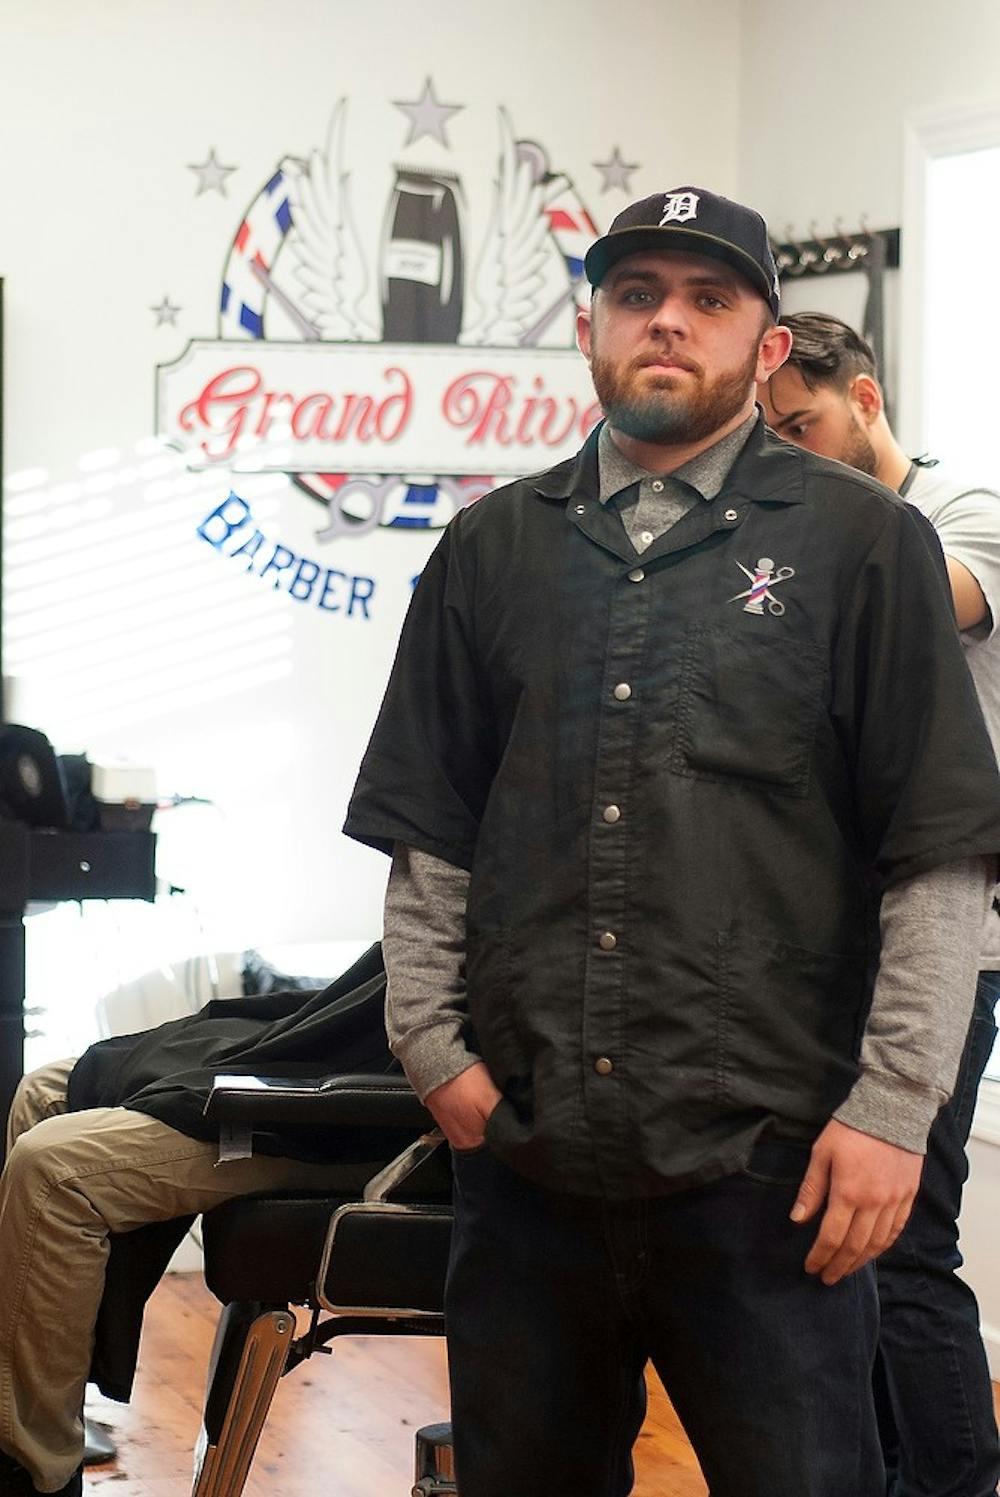 <p>East Lansing resident Grant Foley poses for a picture Feb. 23, 2015, at the Grand River Barber Company. Foley has been working as a barber for six years and loves what he does. Hannah Levy/The State News</p>